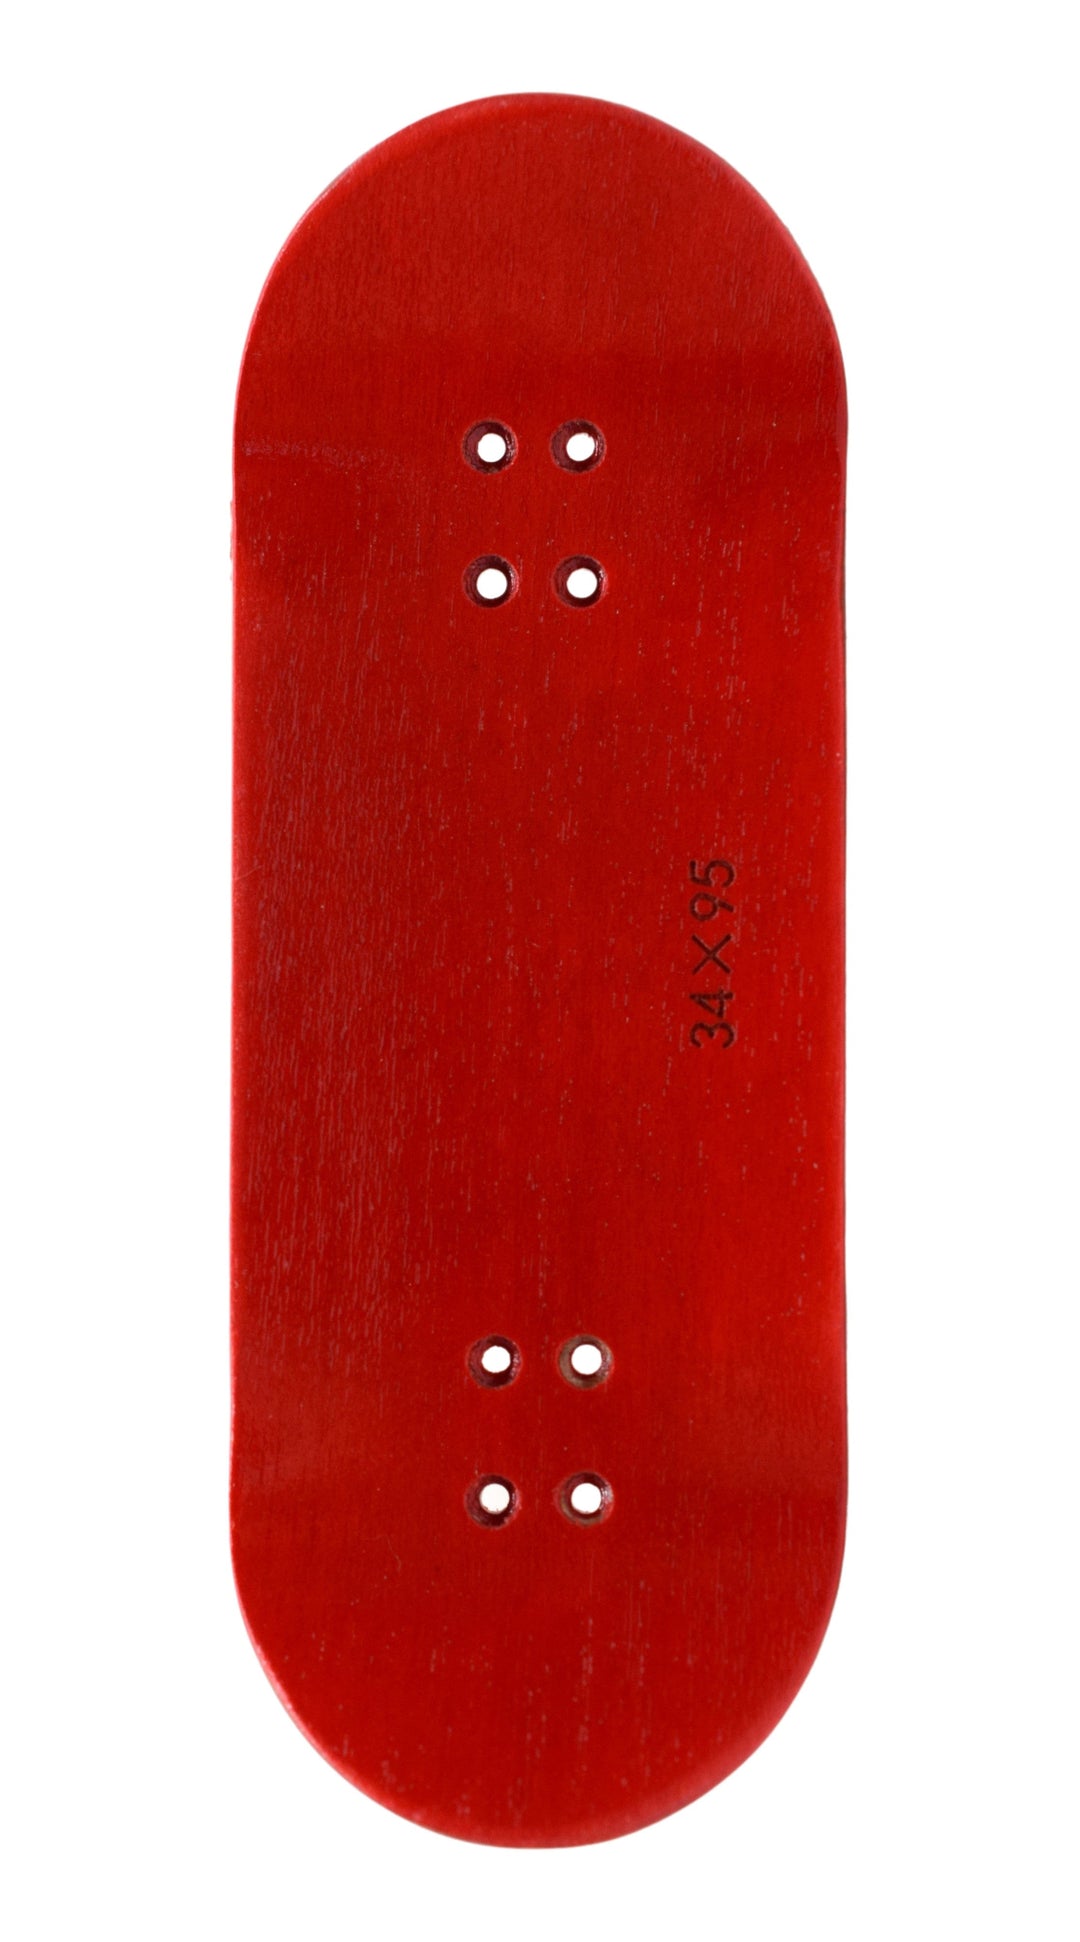 Teak Tuning PROlific Wooden 5 Ply Fingerboard Deck 34x95mm - Cherry Red - with Color Matching Mid Ply